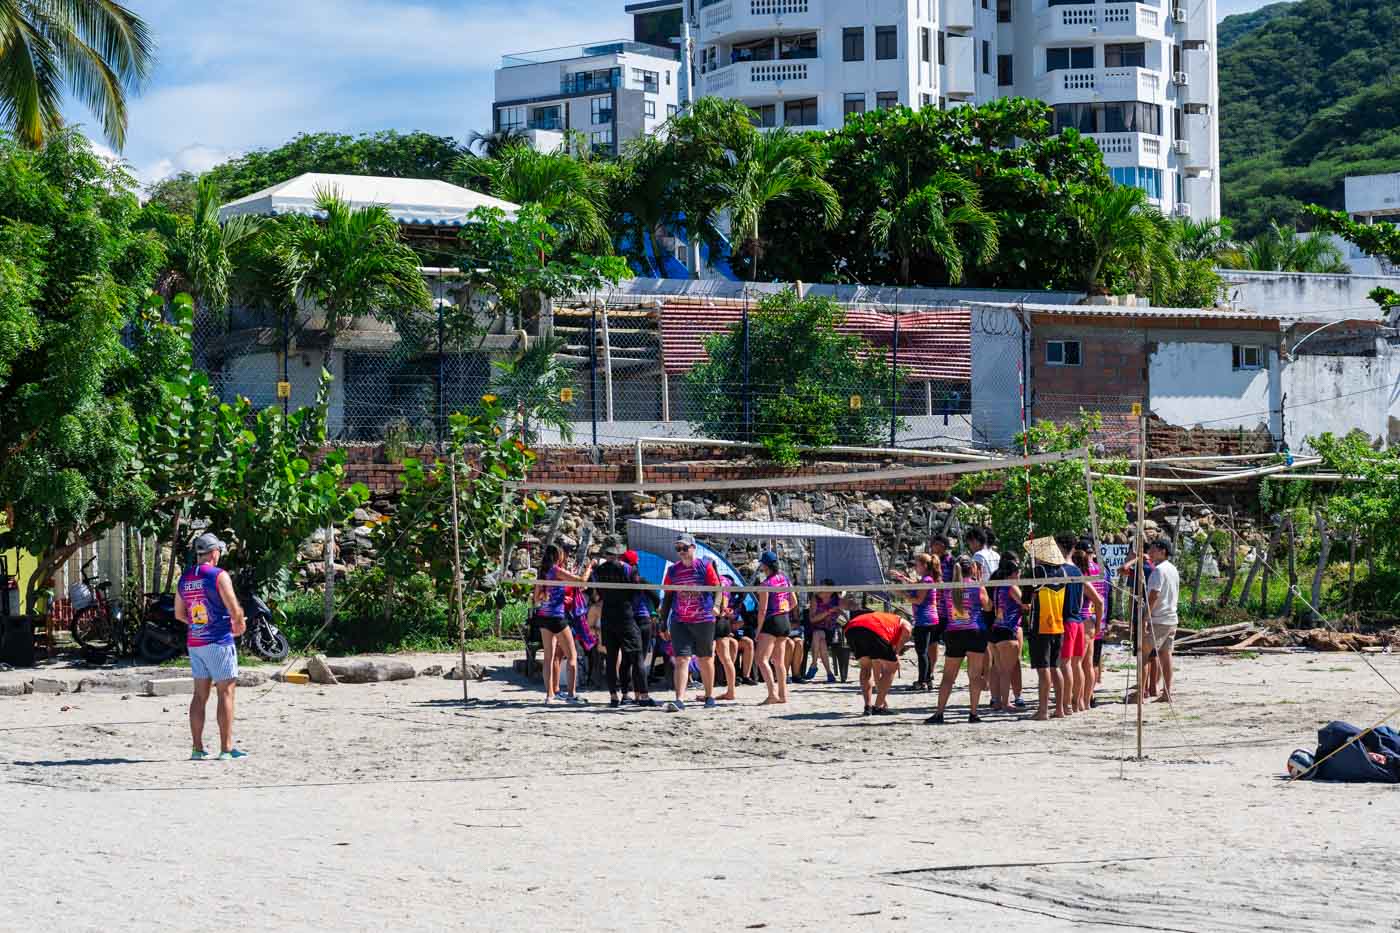 A beach volleyball team wearing pink and purple uniforms.